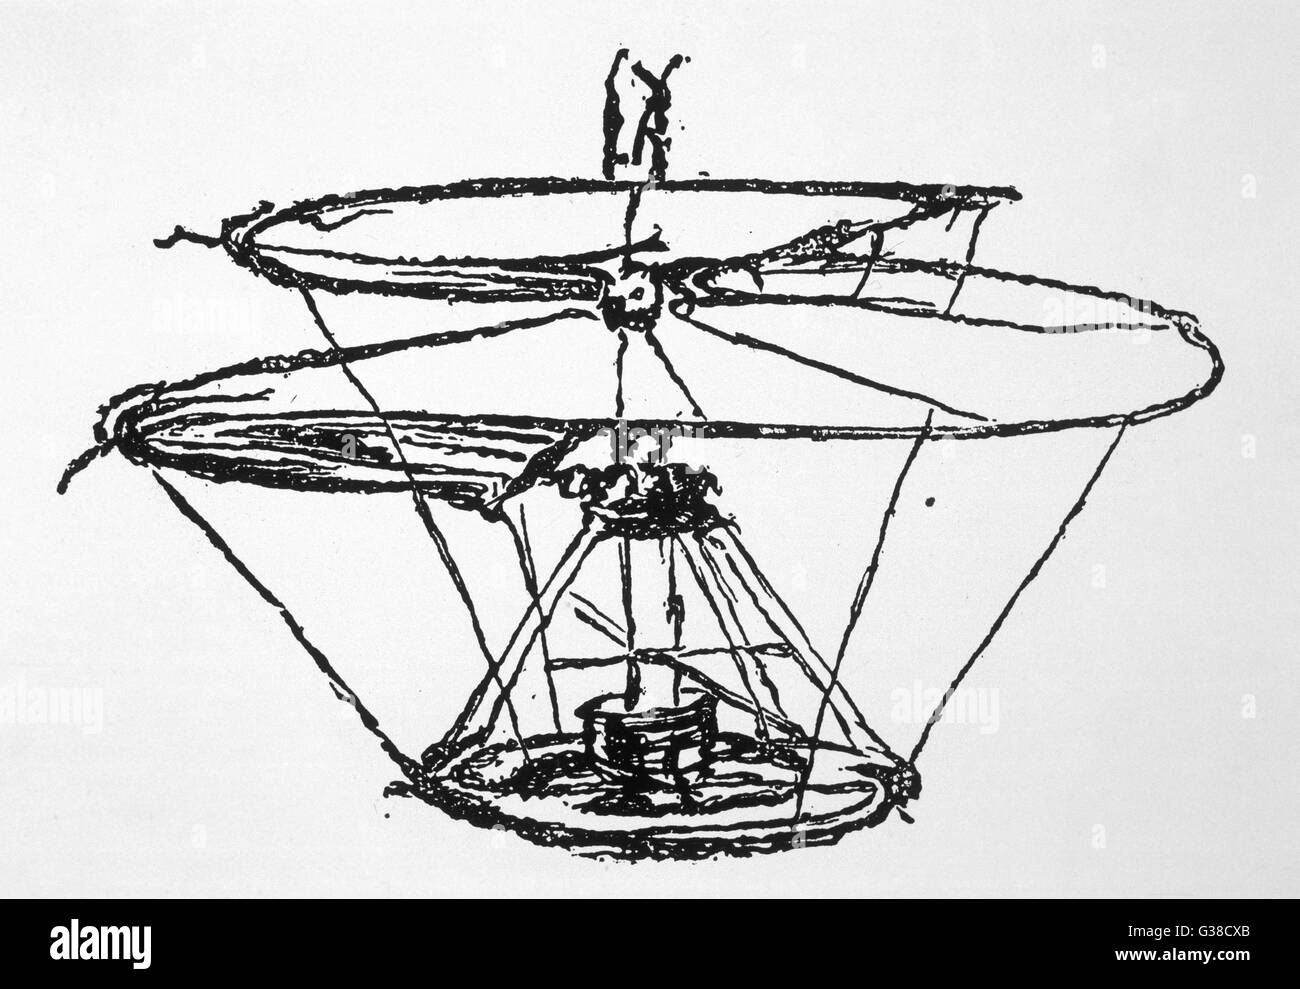 LEONARDO DA VINCI Sketch of a flying machine  which seems in some respects  to anticipate the helicopter,  though the technology is not  clear     Date: circa 1500 Stock Photo